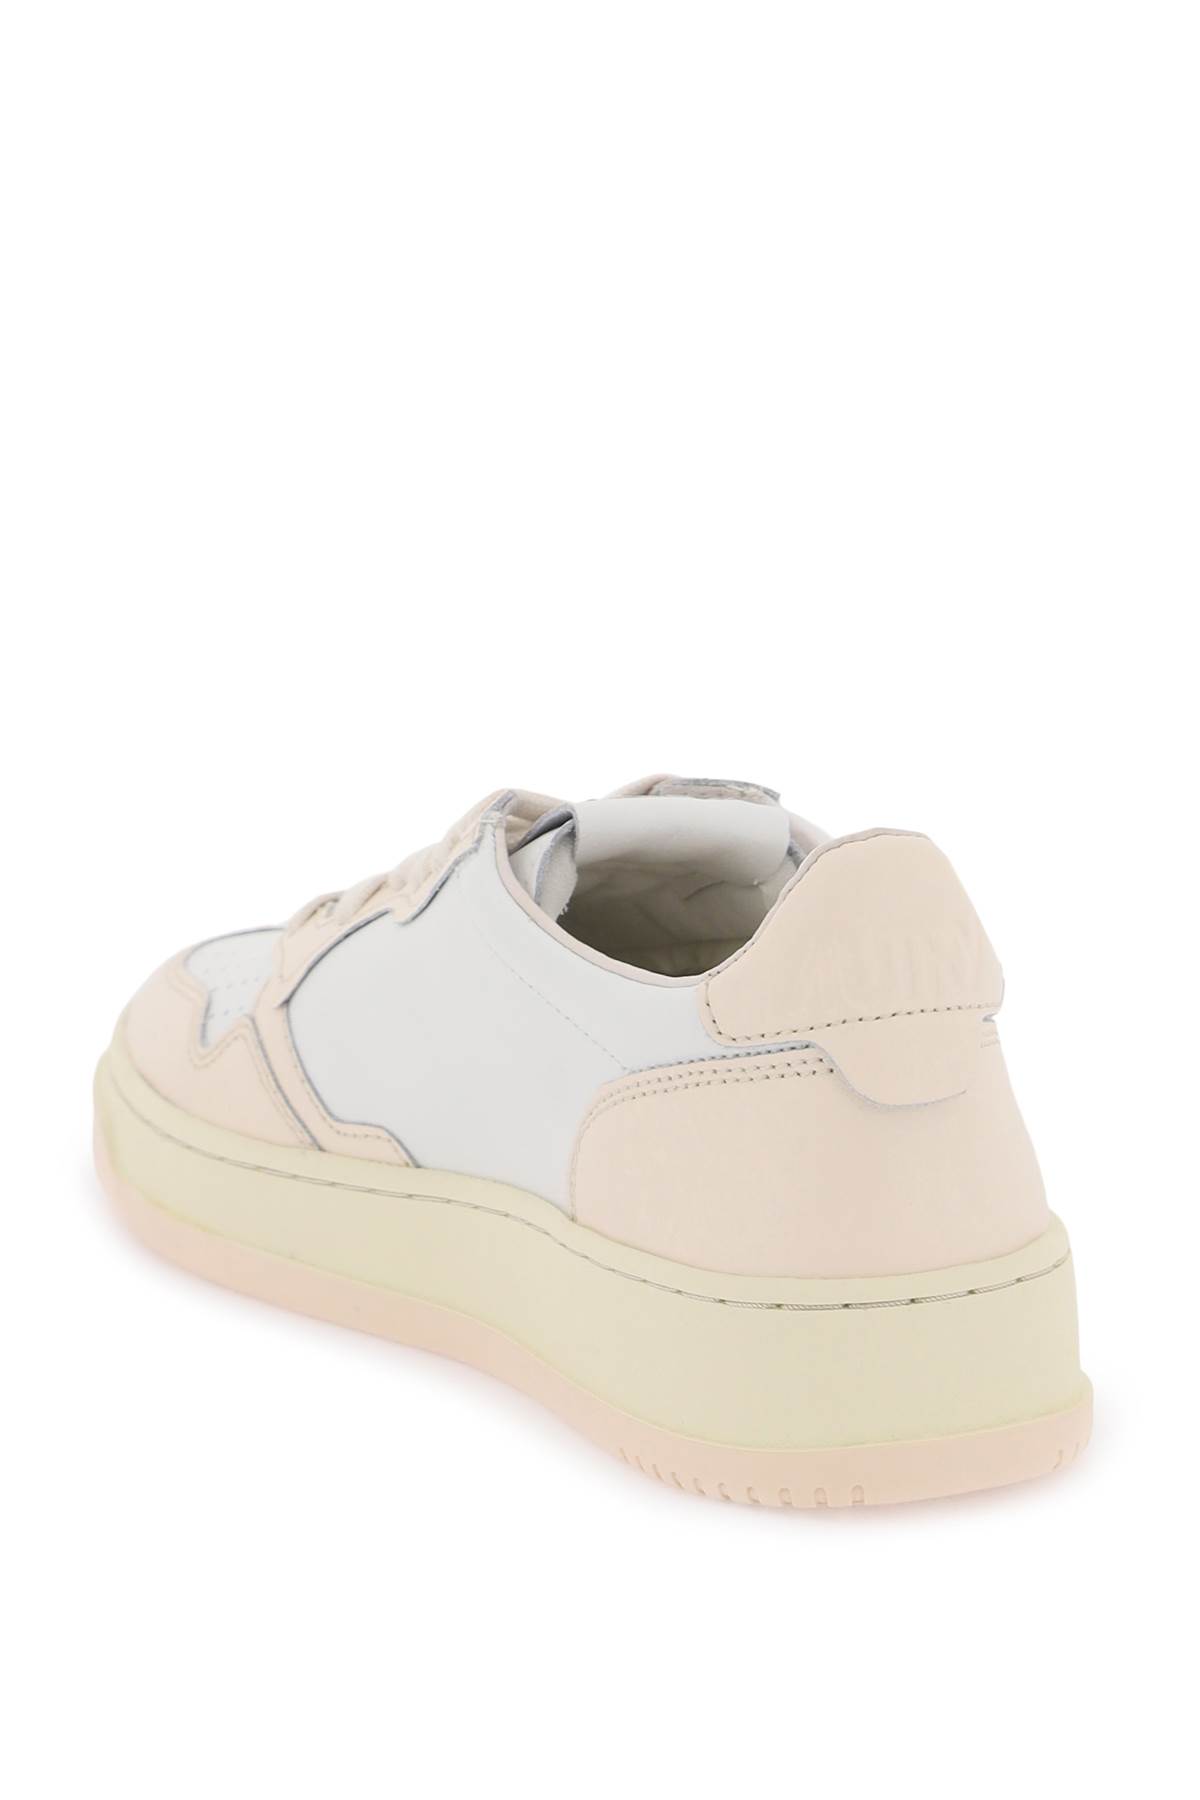 Shop Autry Leather Medalist Low Sneakers In White Denim